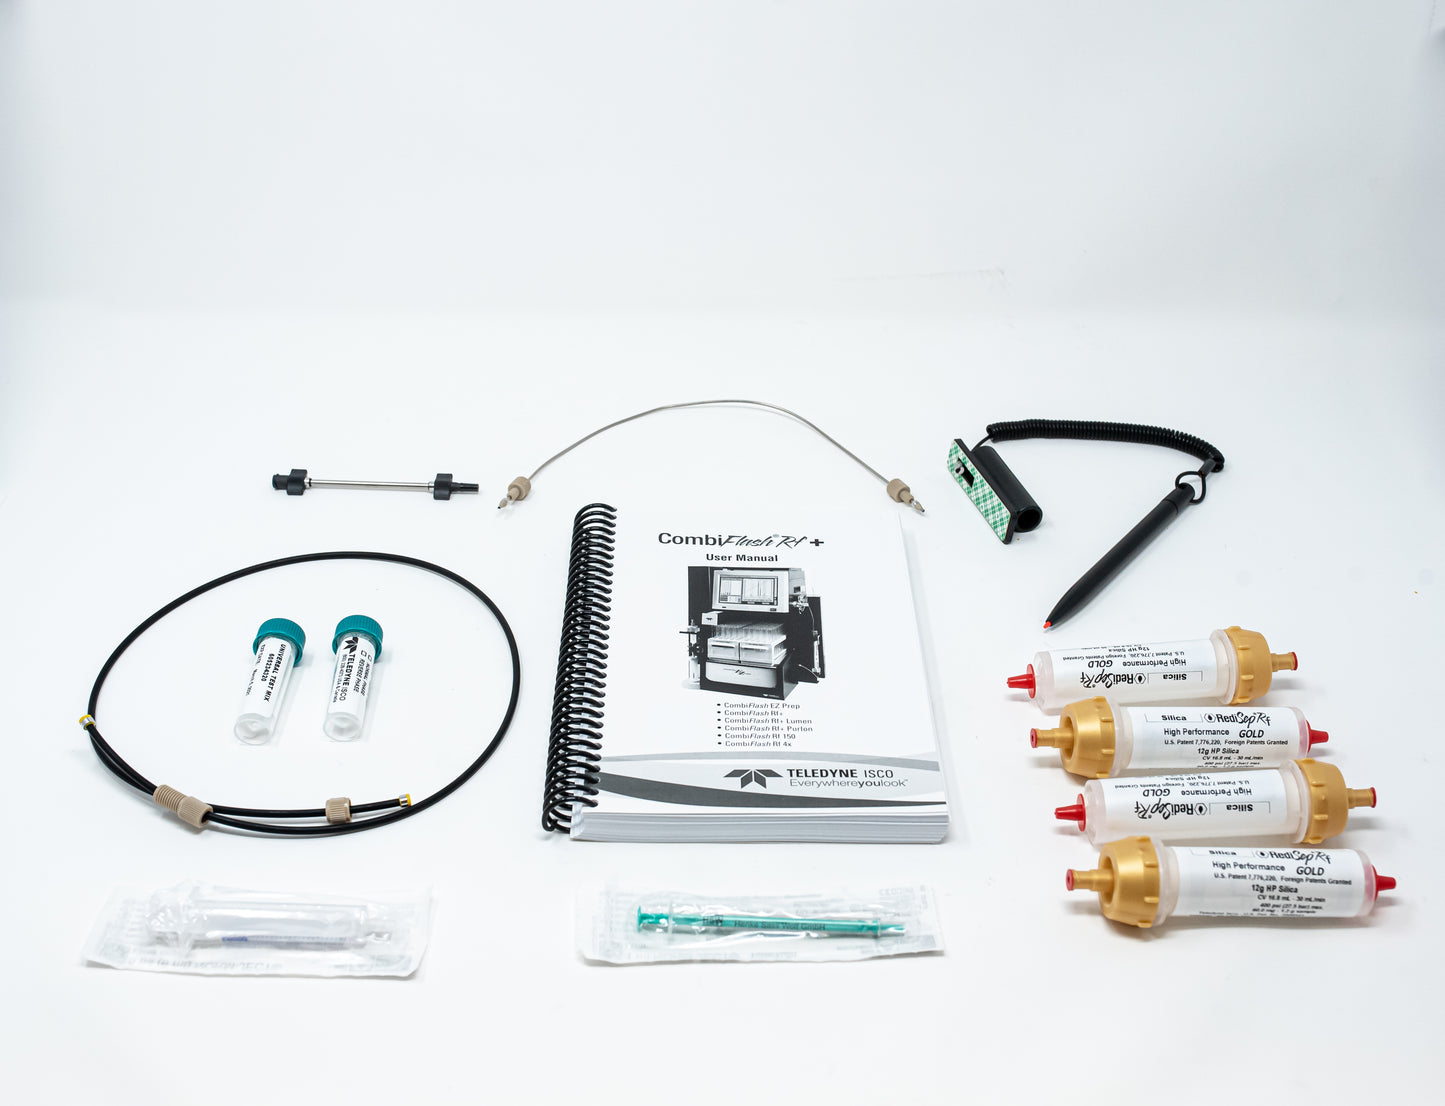 Prime Tube Assembly, Stylus with tether, Inject valve, tubing, Universal verification kit